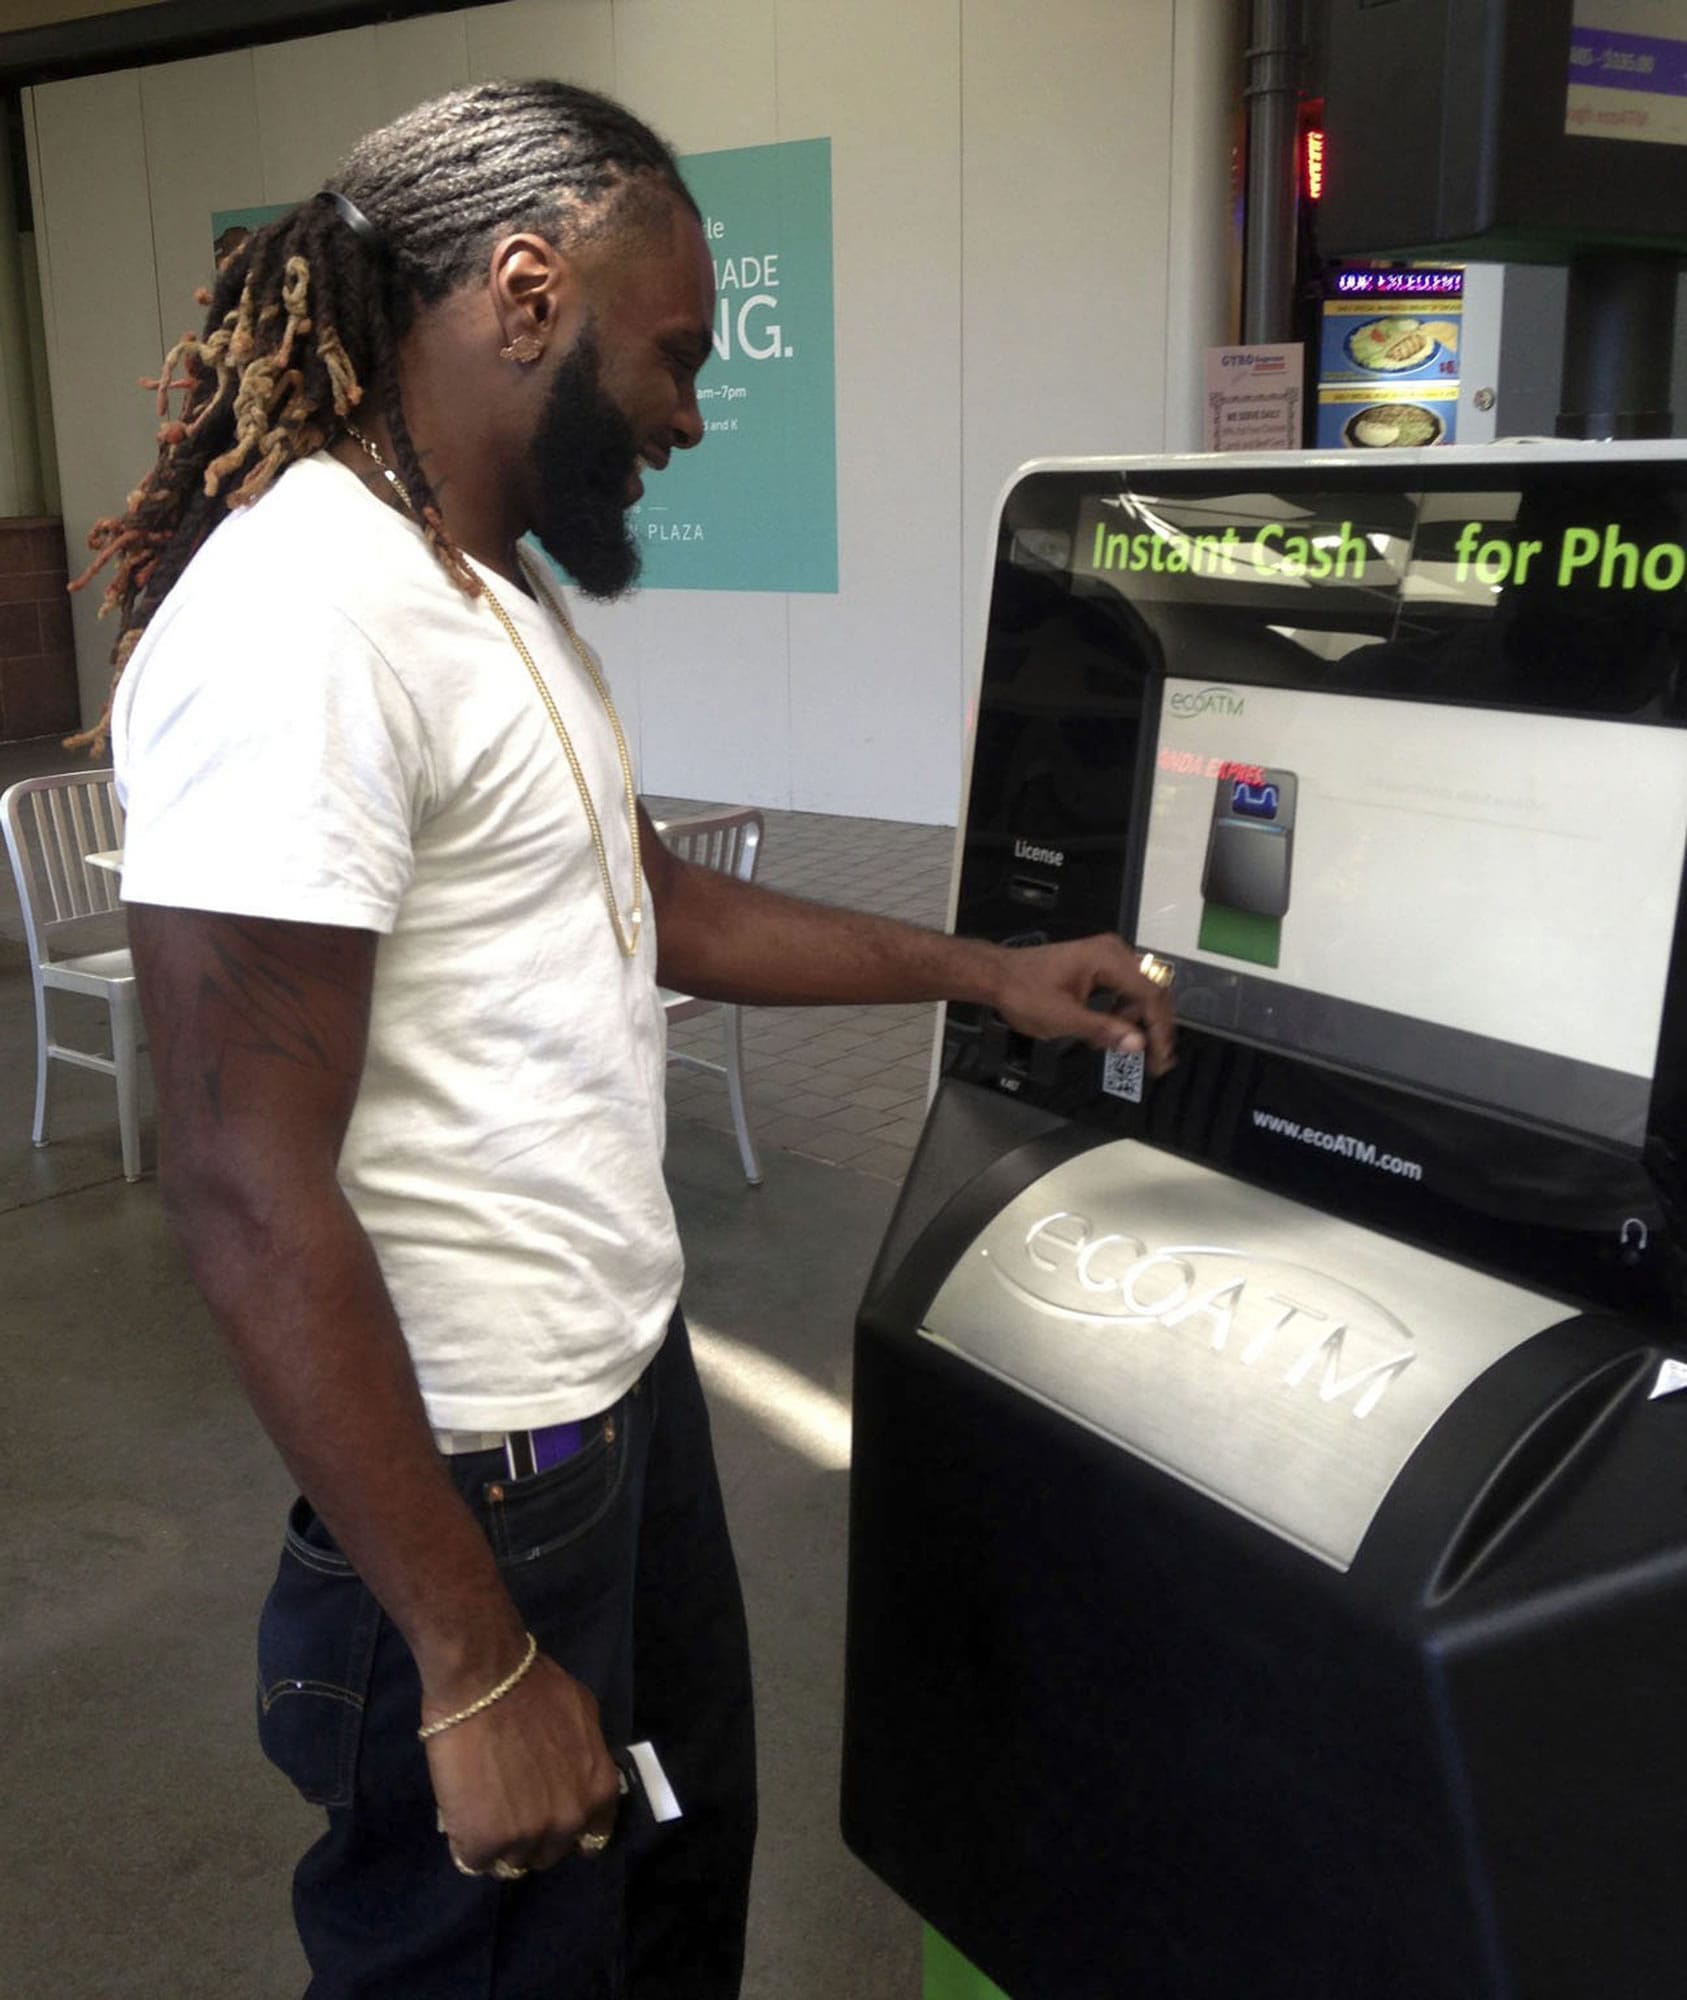 Marcellus Lang, a security guard at Old Sacramento sports bar, uses an EcoATM kiosk at Downtown Plaza mall to get instant cash for two devices: a used cellphone and an iPod Touch.